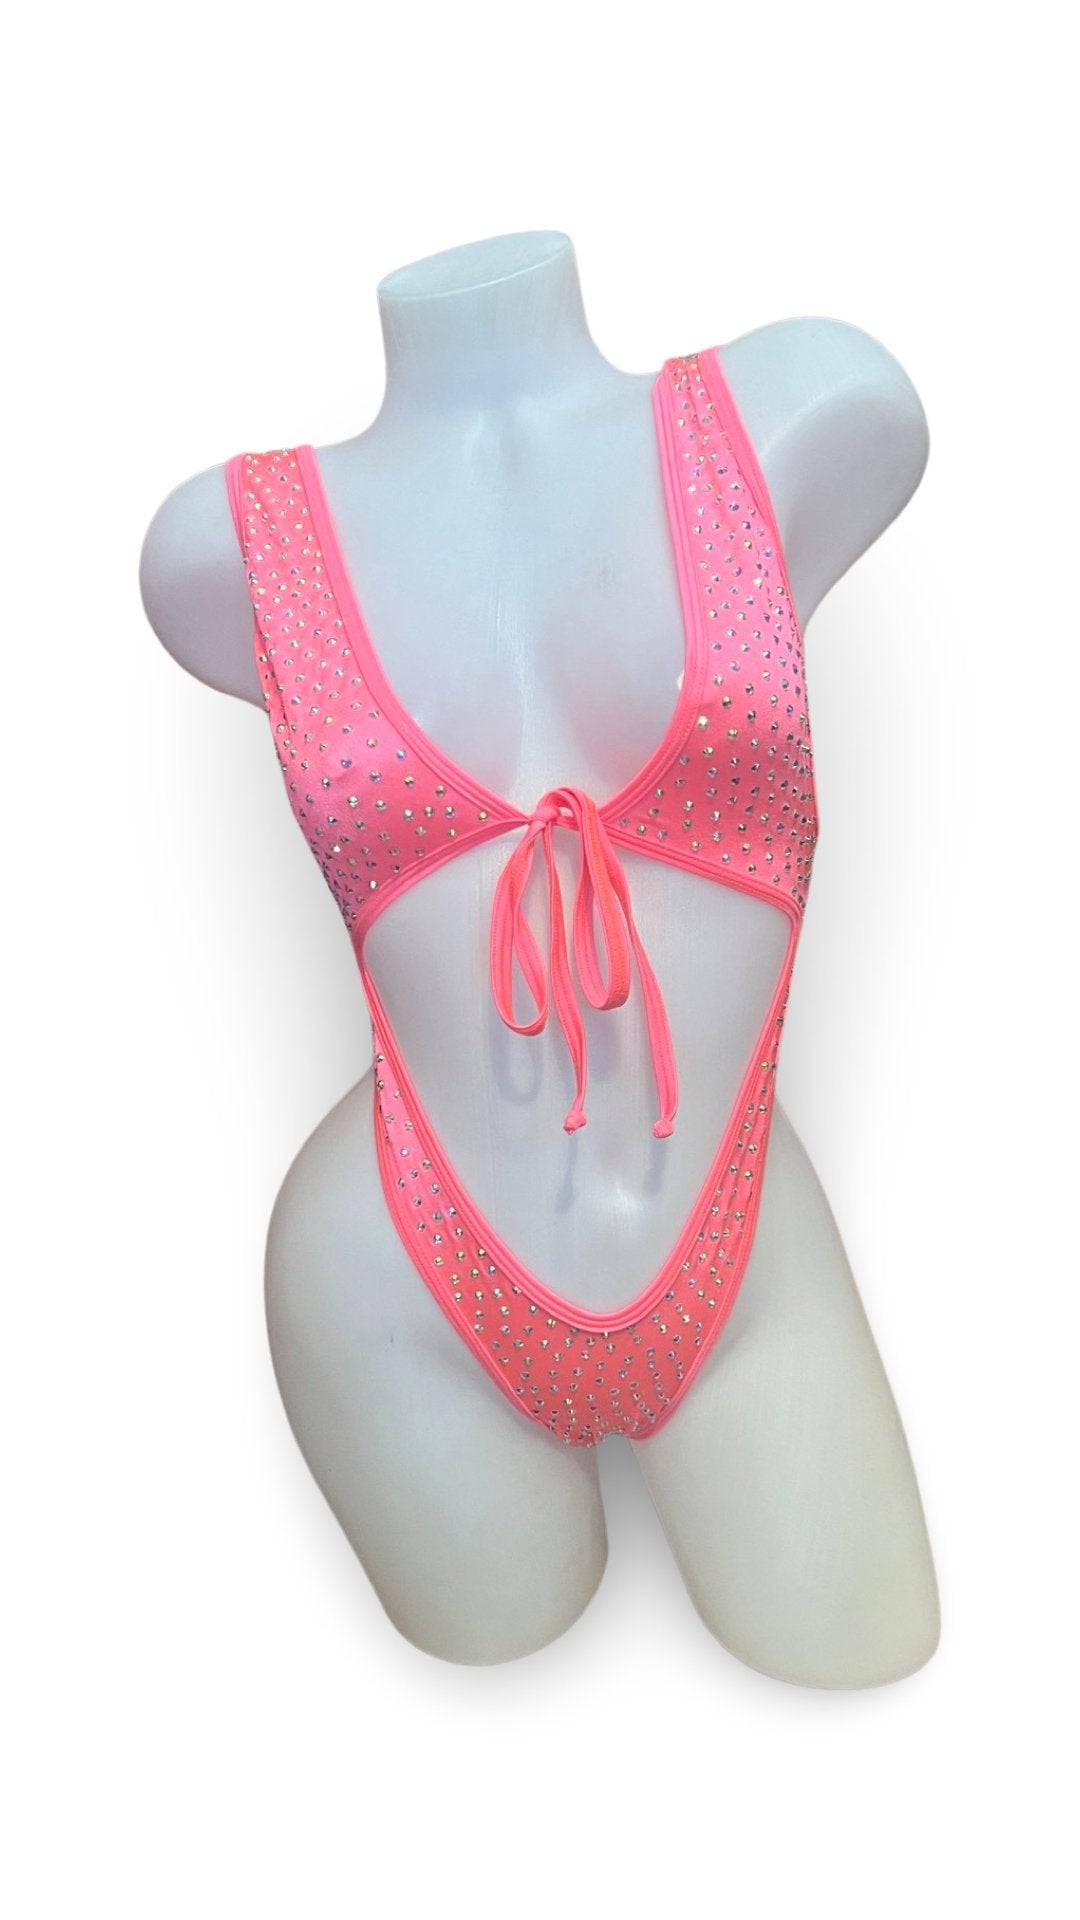 Rhinestone Front Tie One Piece Coral - Model Express VancouverBikini